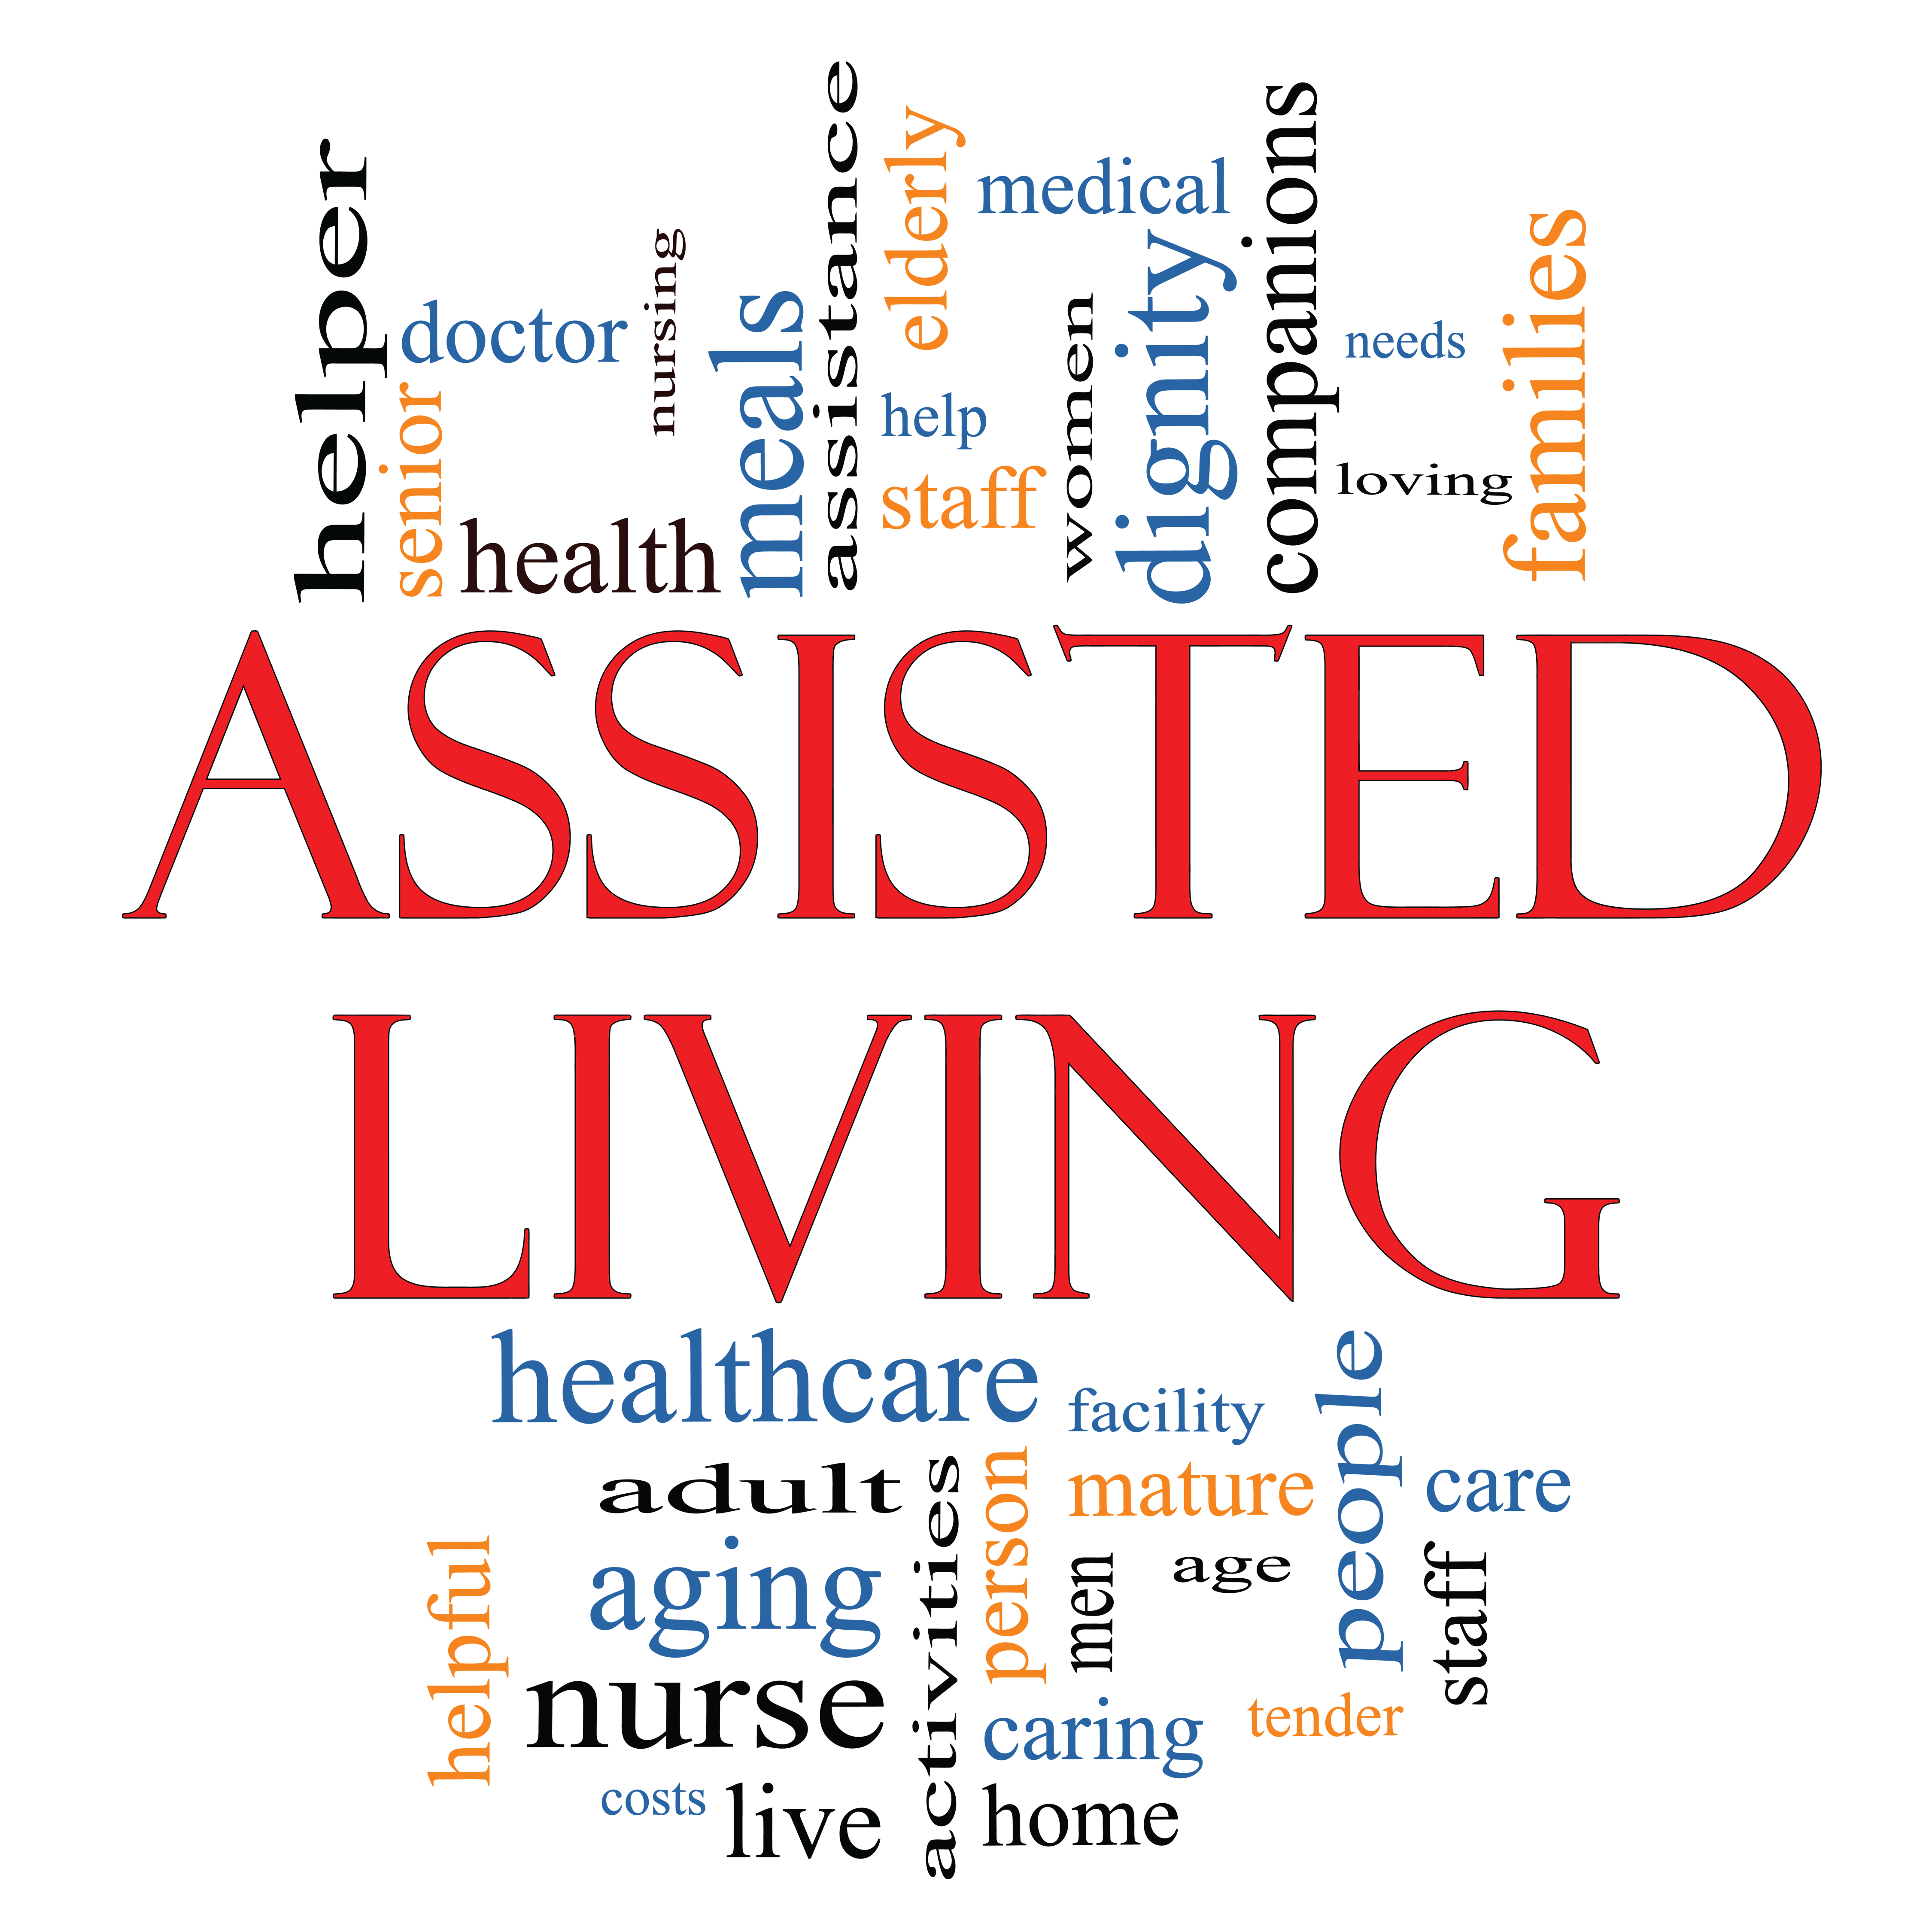 Assisted Living Clipart.